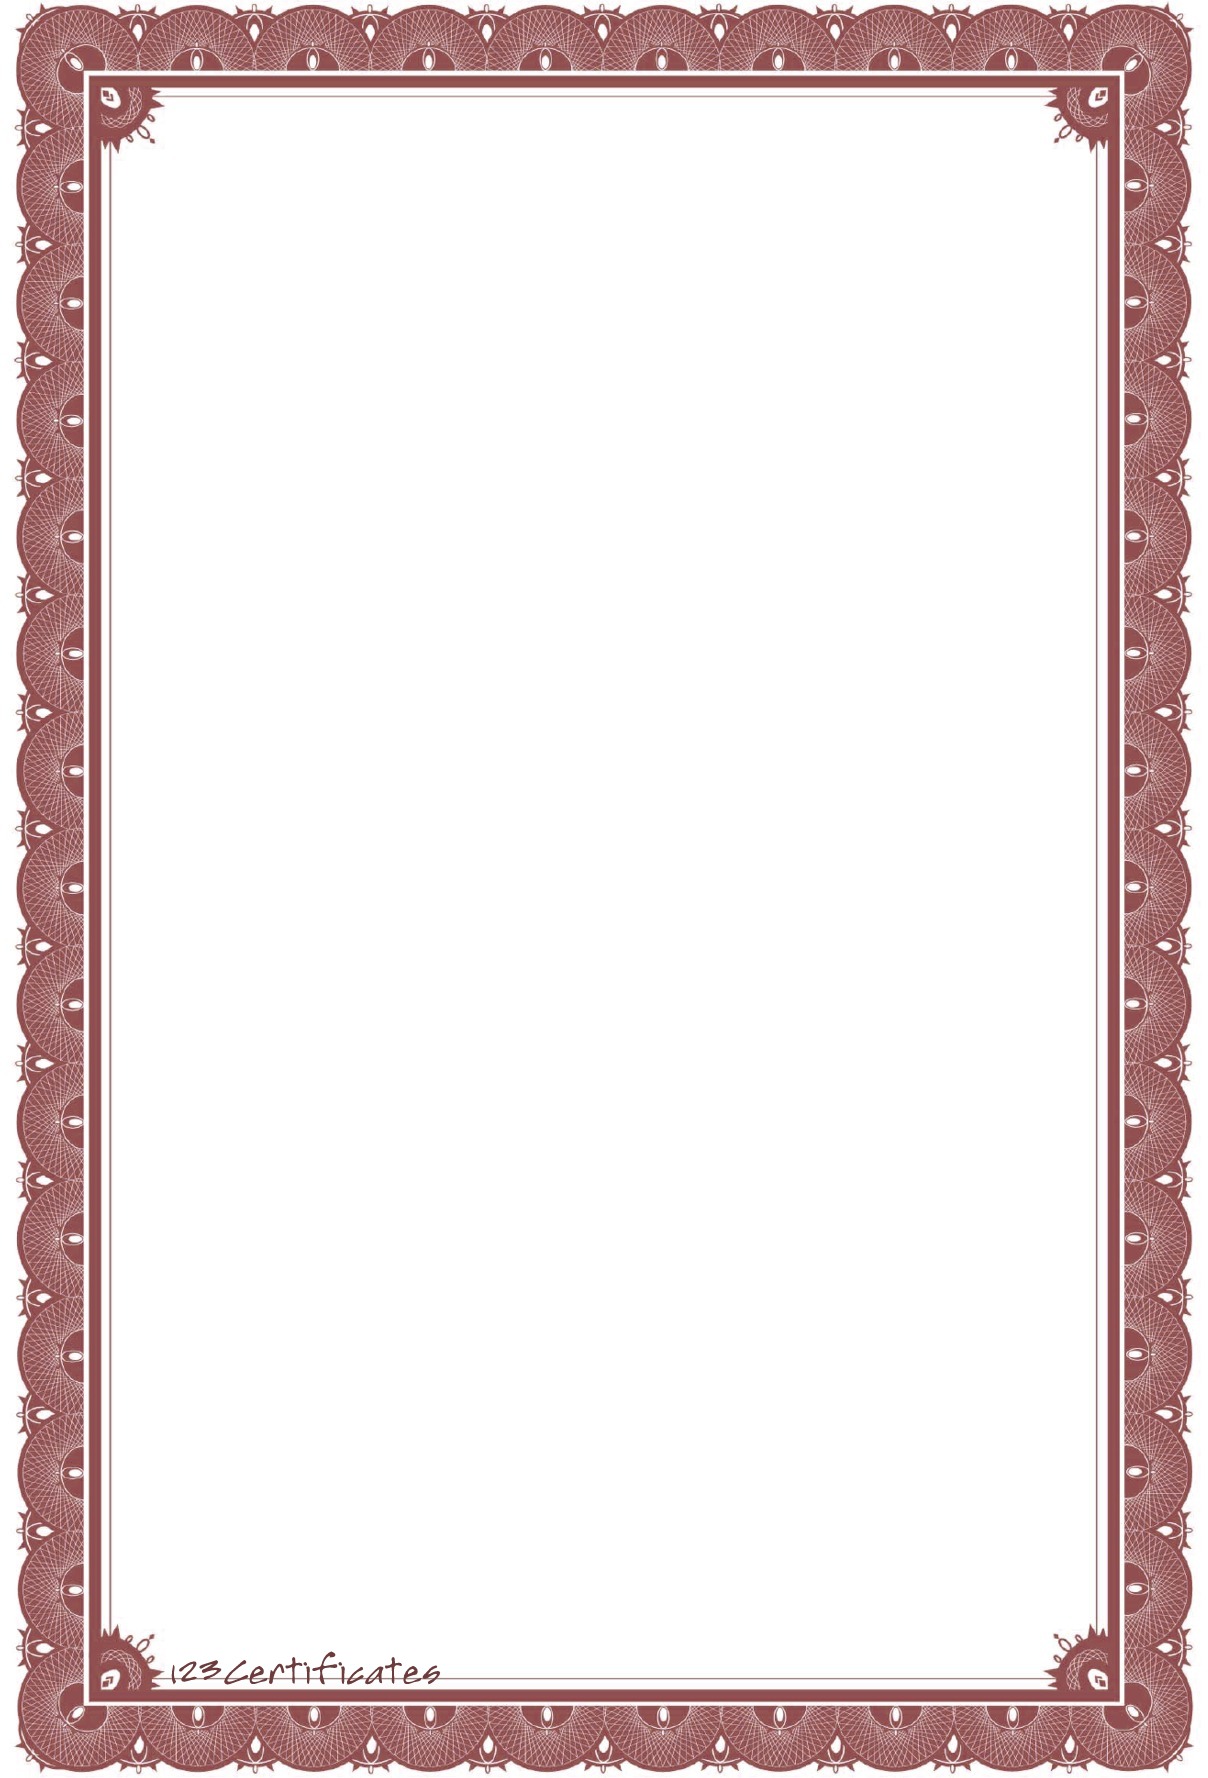 simple border templates for word